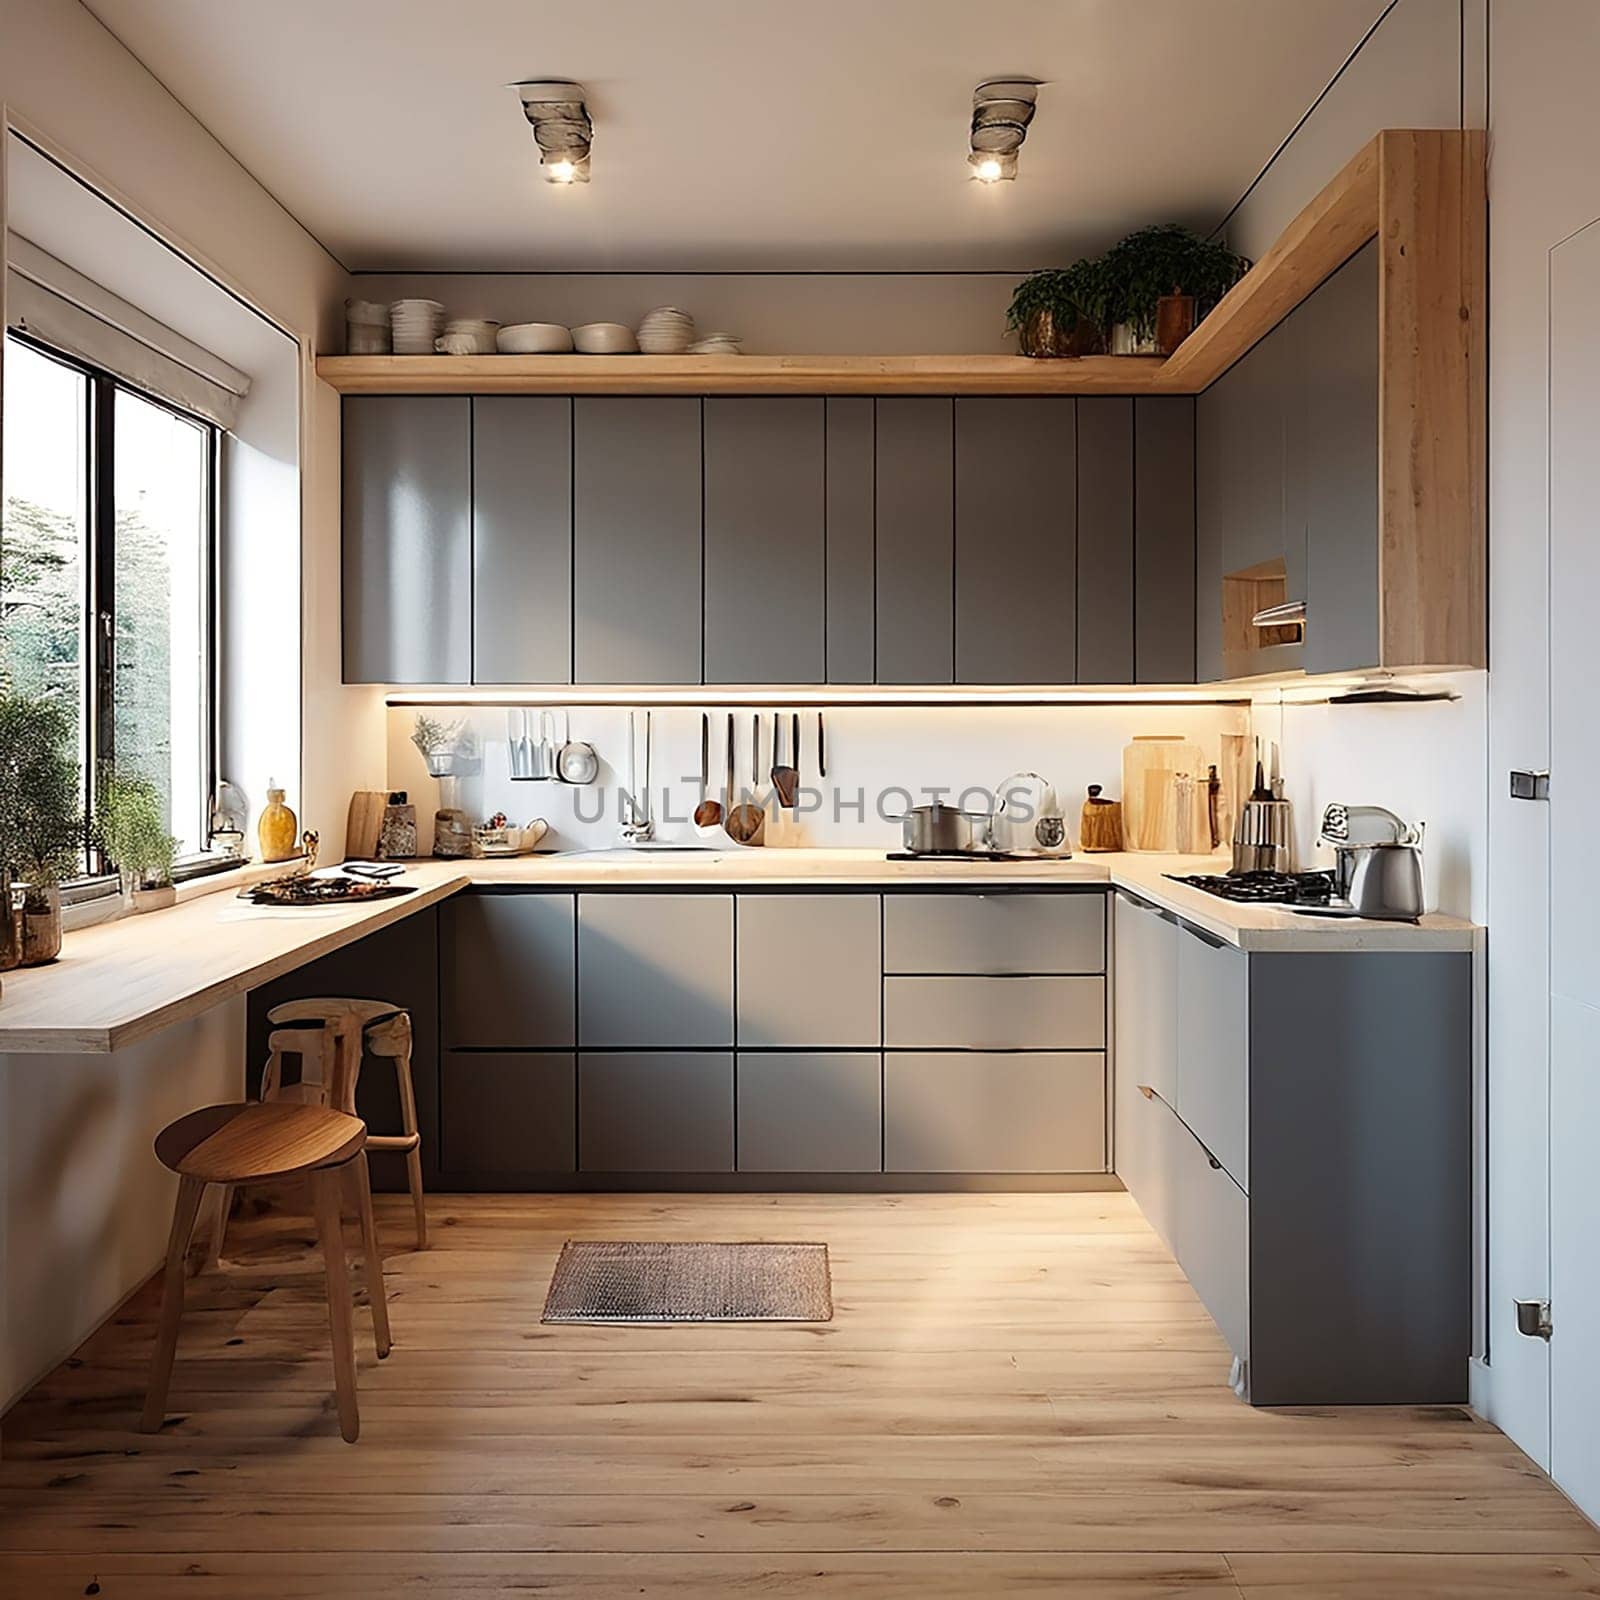 Kitchen Conversations: Designing a Space for Connection and Inspiration by Petrichor